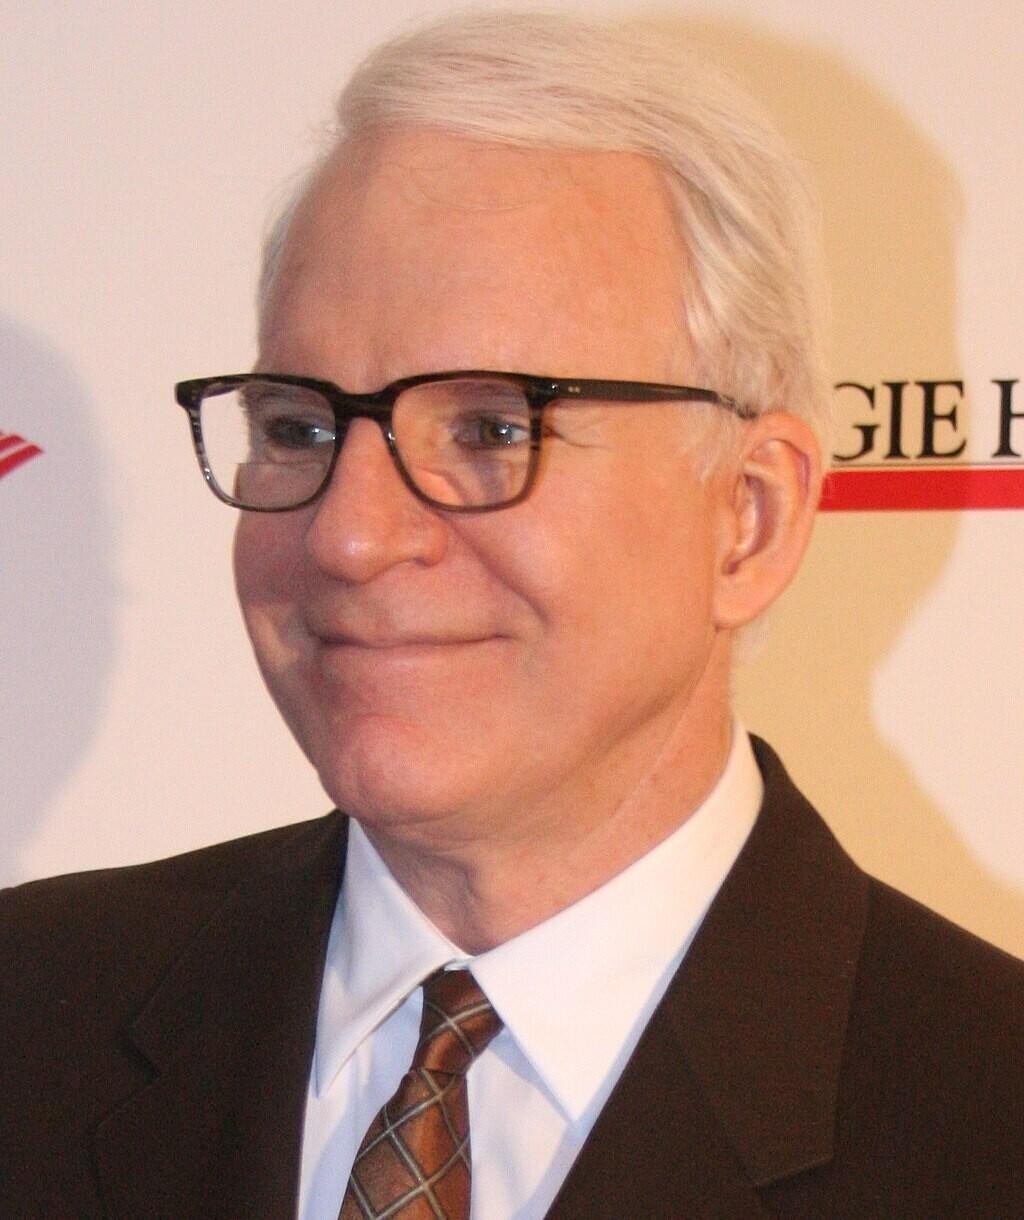 Steve Martin with Spectacles on